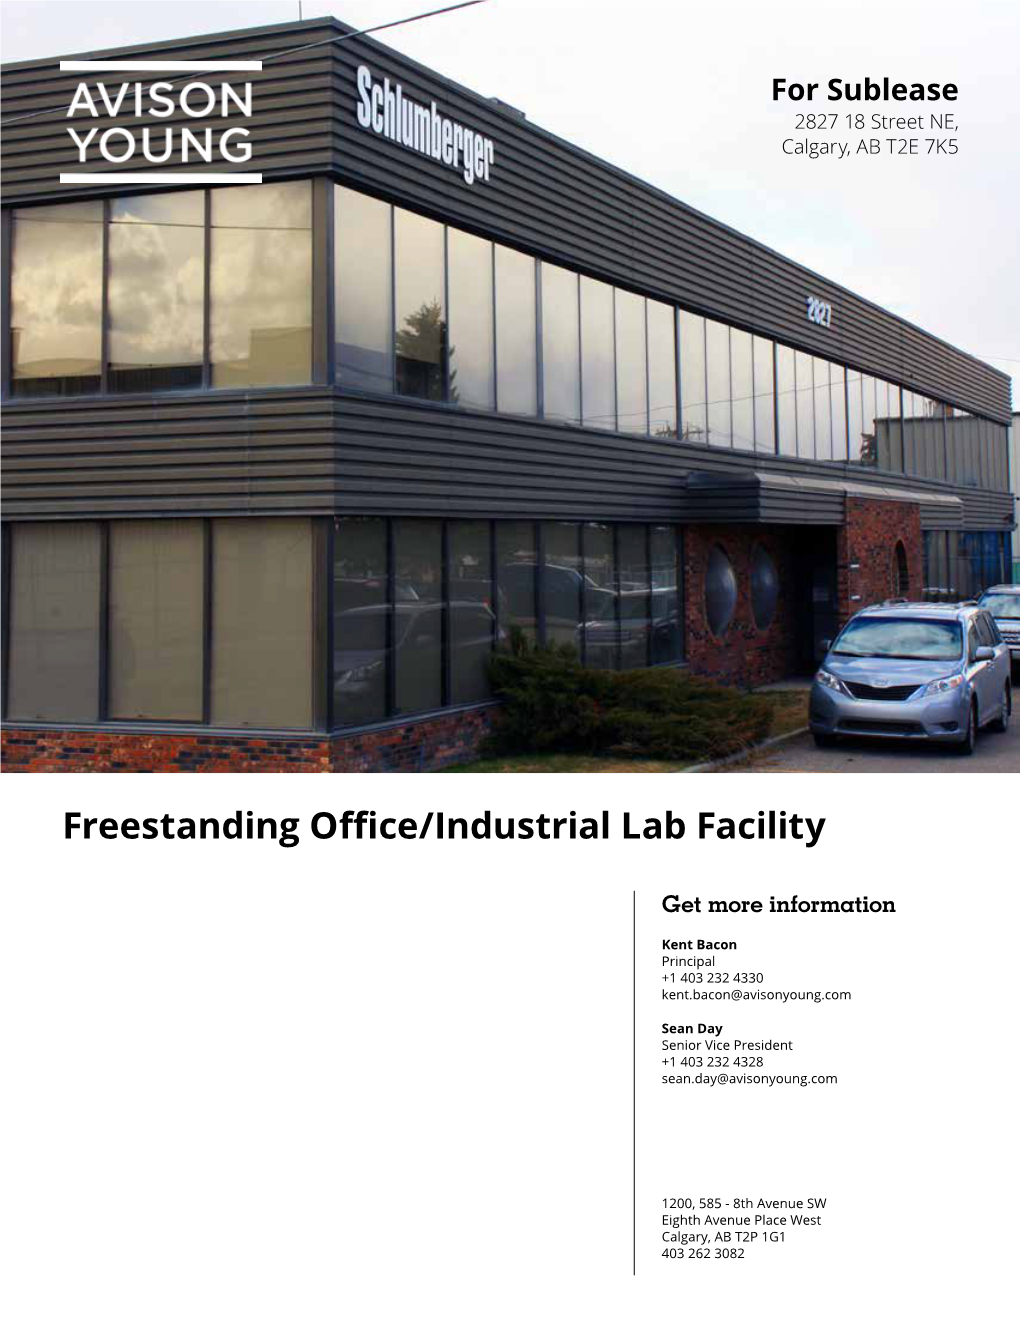 Freestanding Office/Industrial Lab Facility